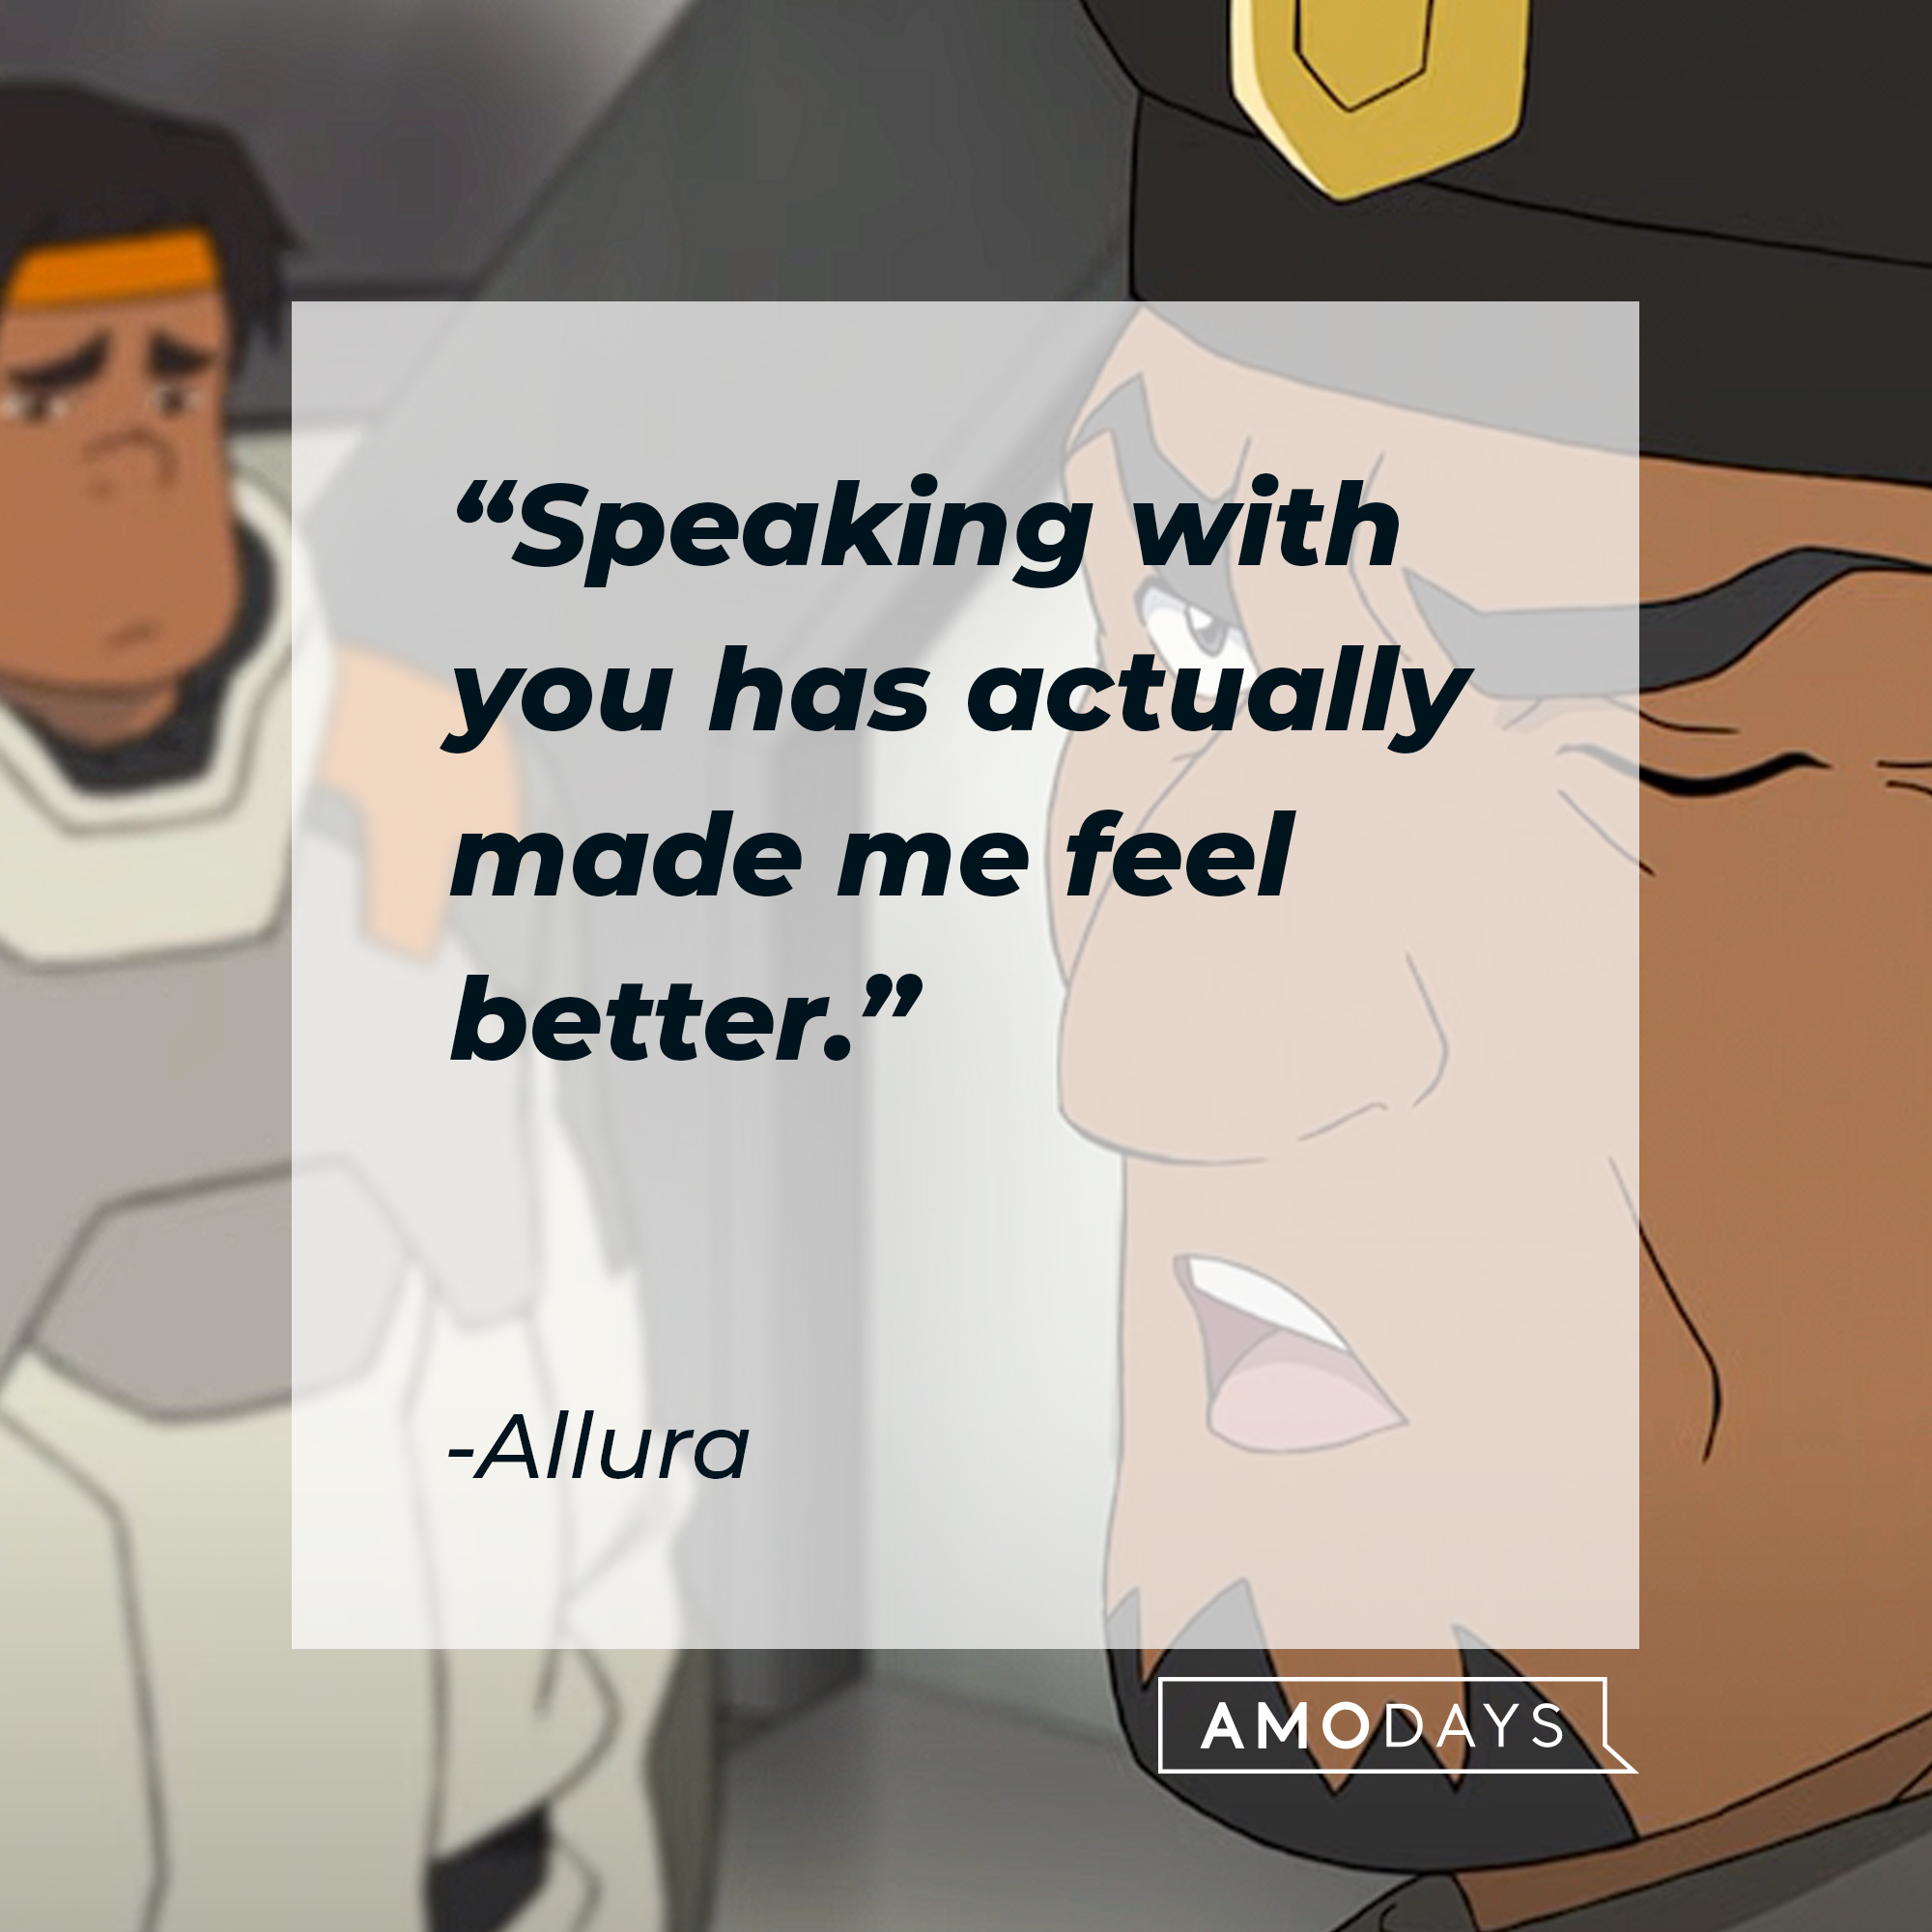 Allura's quote: Speaking with you has actually made me feel better." | Source: youtube.com/netflixafterschool